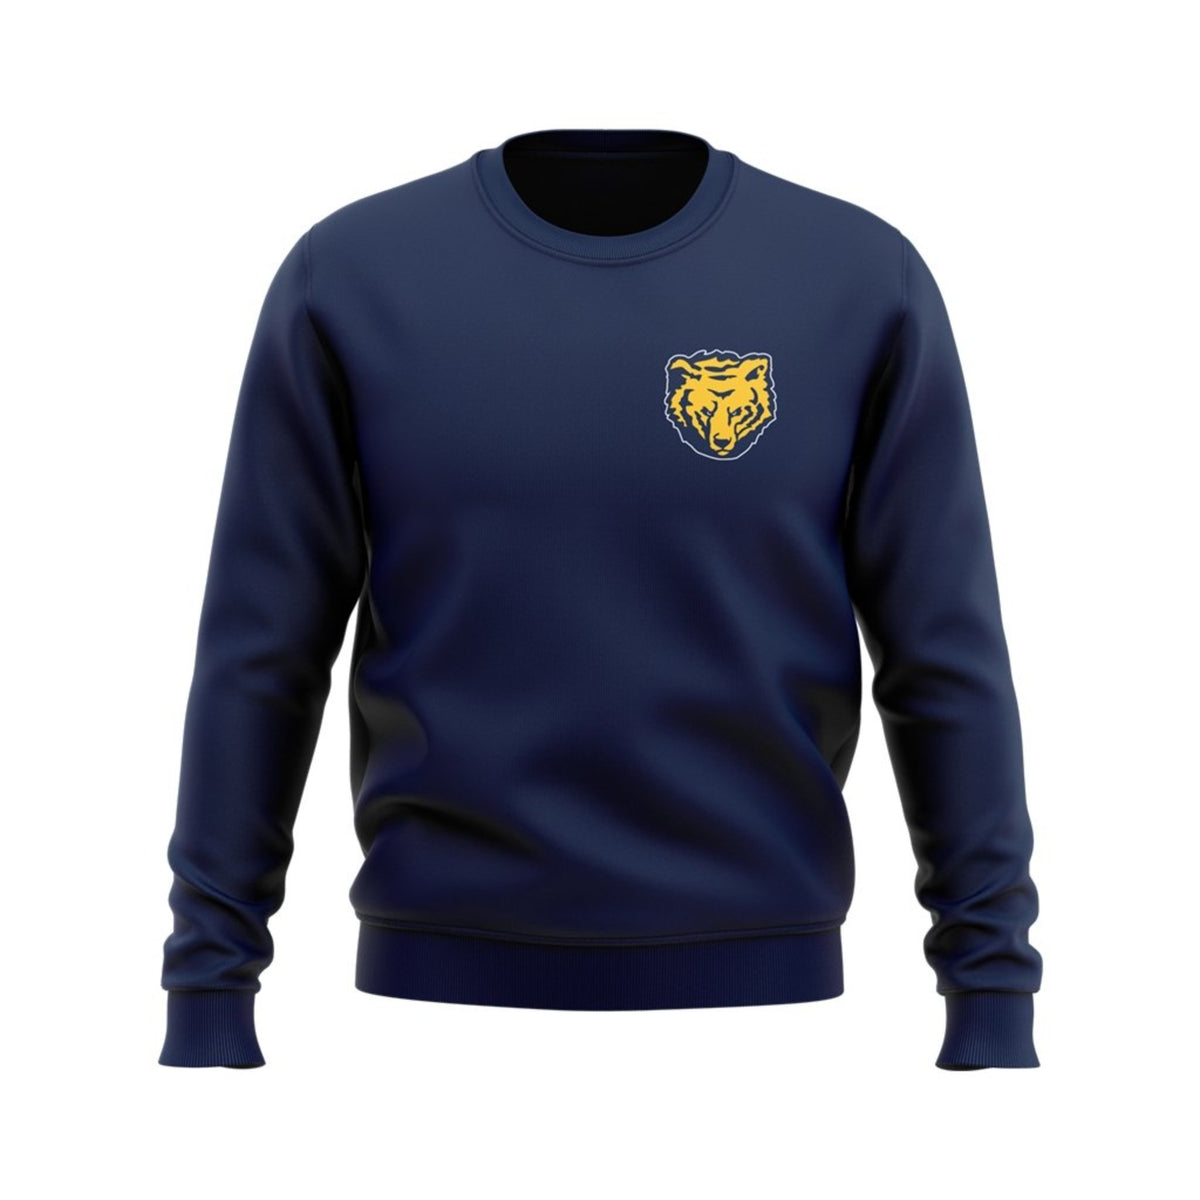 BC Rugby 2022 Bears Crew Neck Sweater - www.therugbyshop.com www.therugbyshop.com MEN&#39;S / NAVY / S XIX Brands HOODIES BC Rugby 2022 Bears Crew Neck Sweater